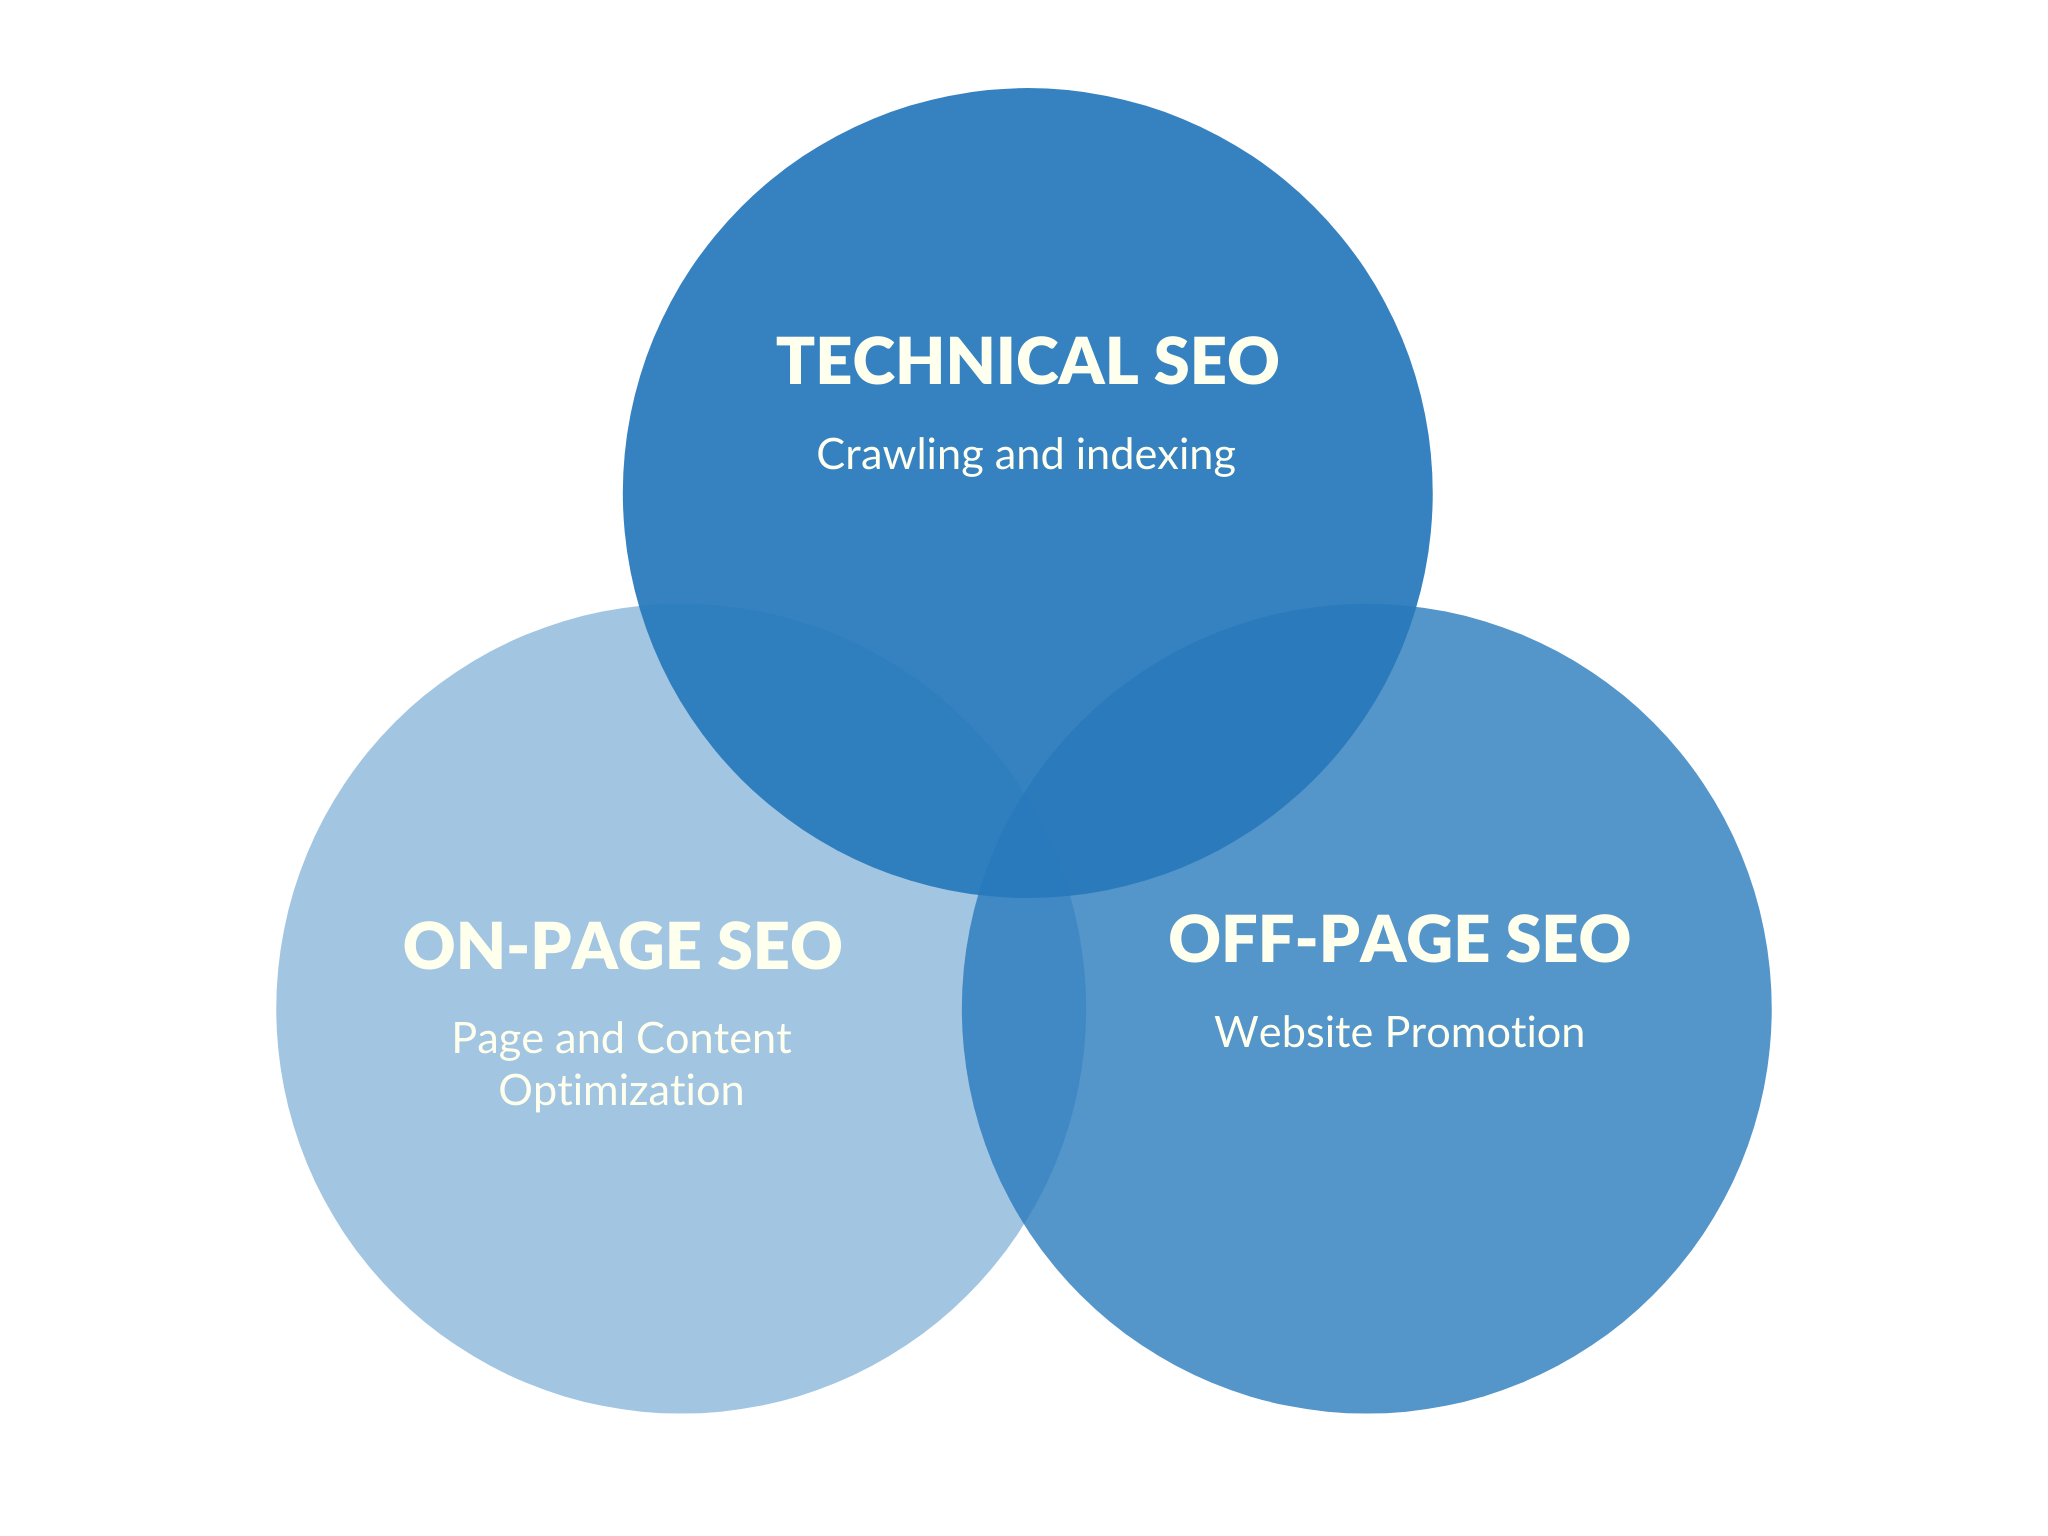 What is main aspect of technical SEO?